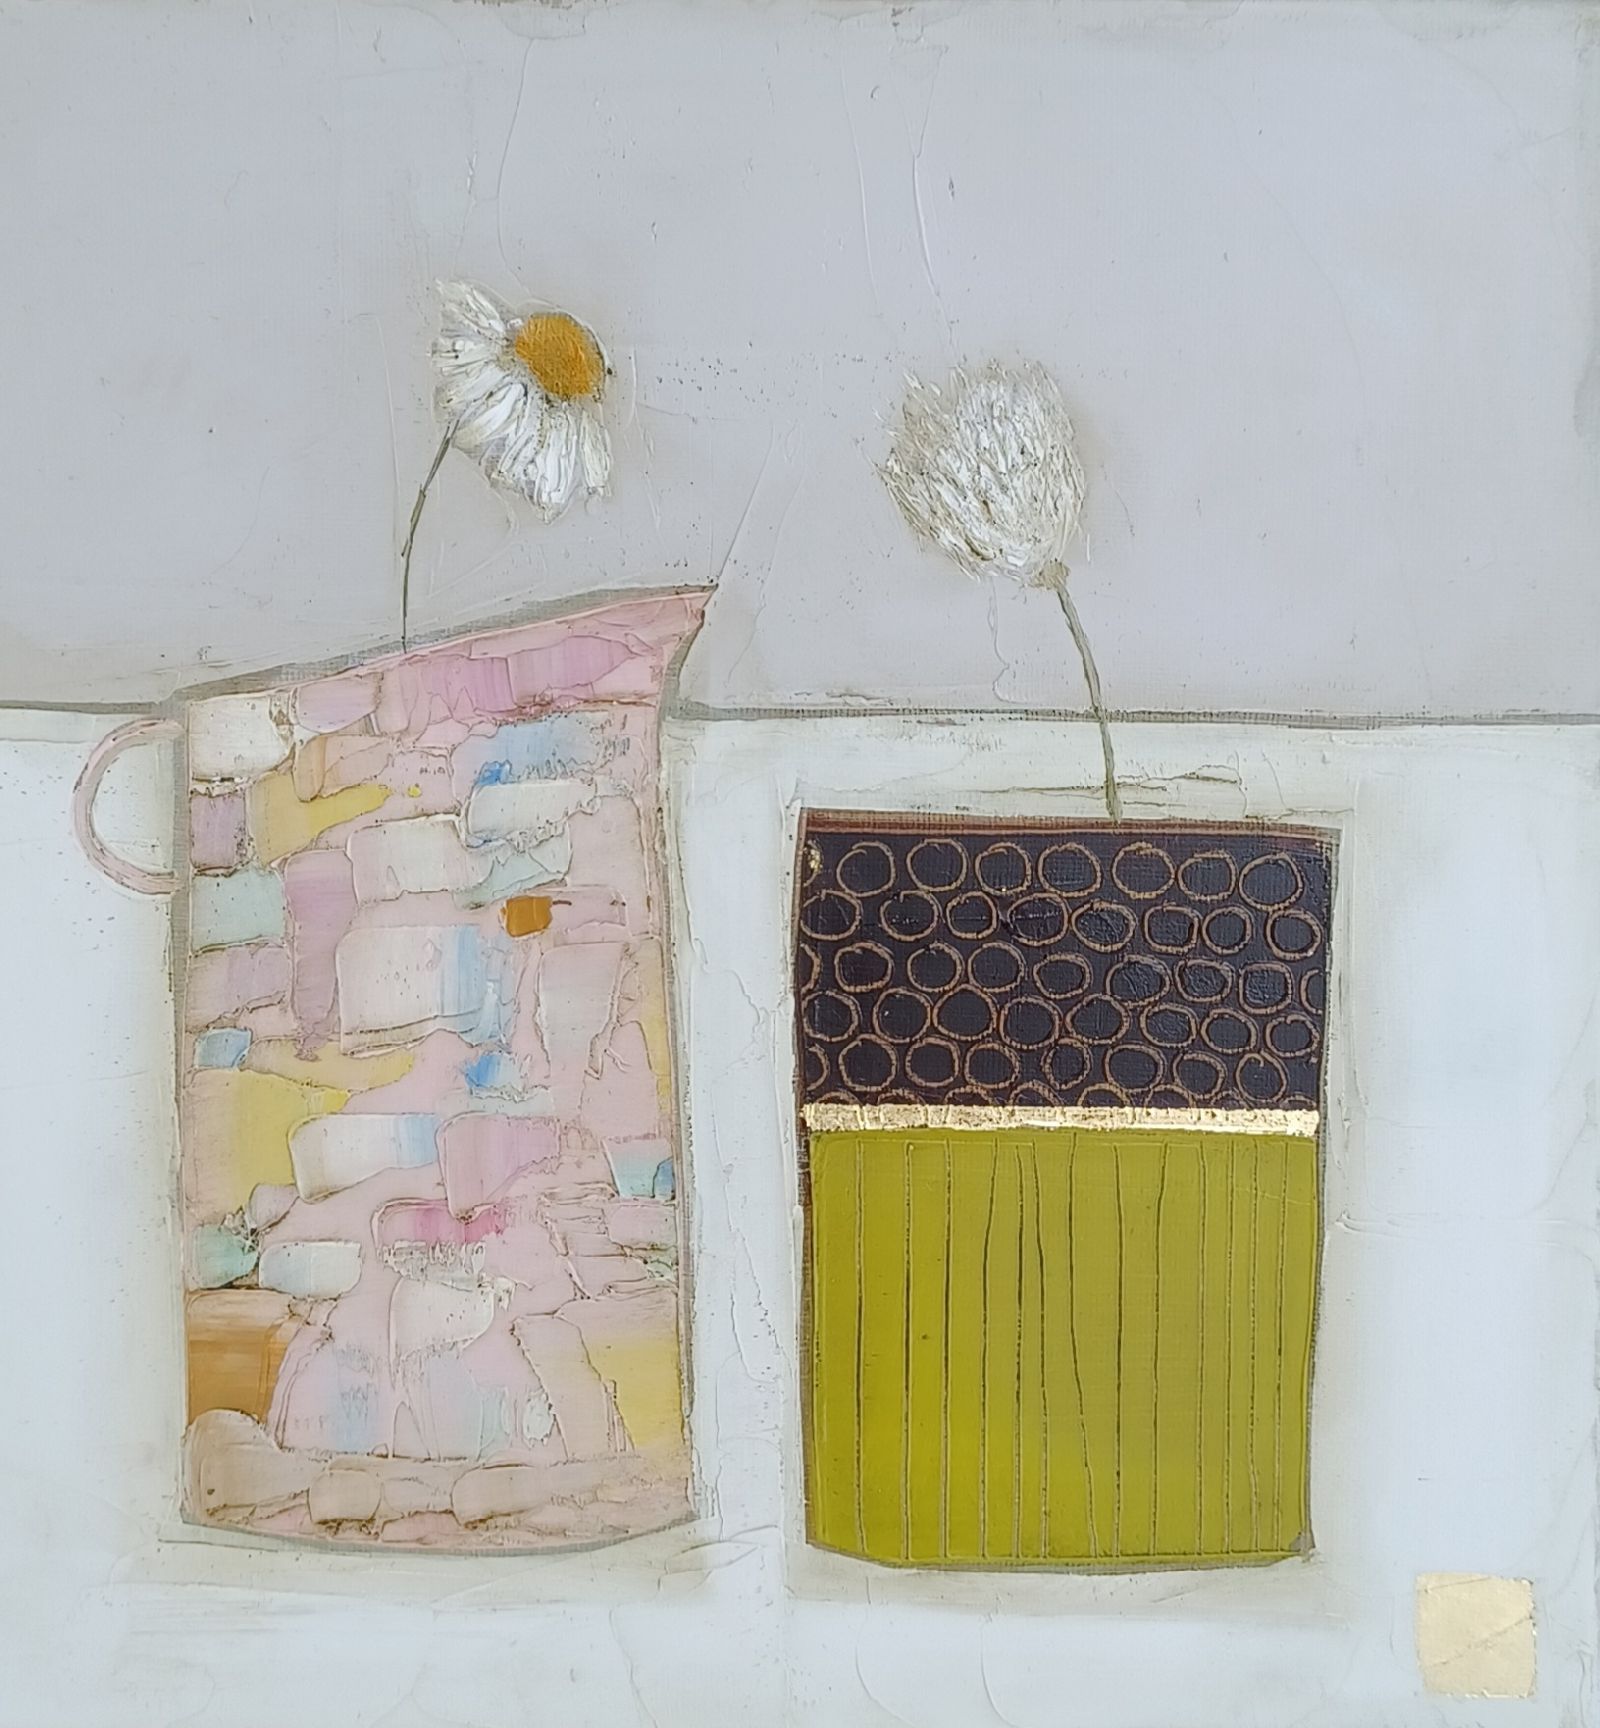 Eithne  Roberts - Daisy and bog cotton 